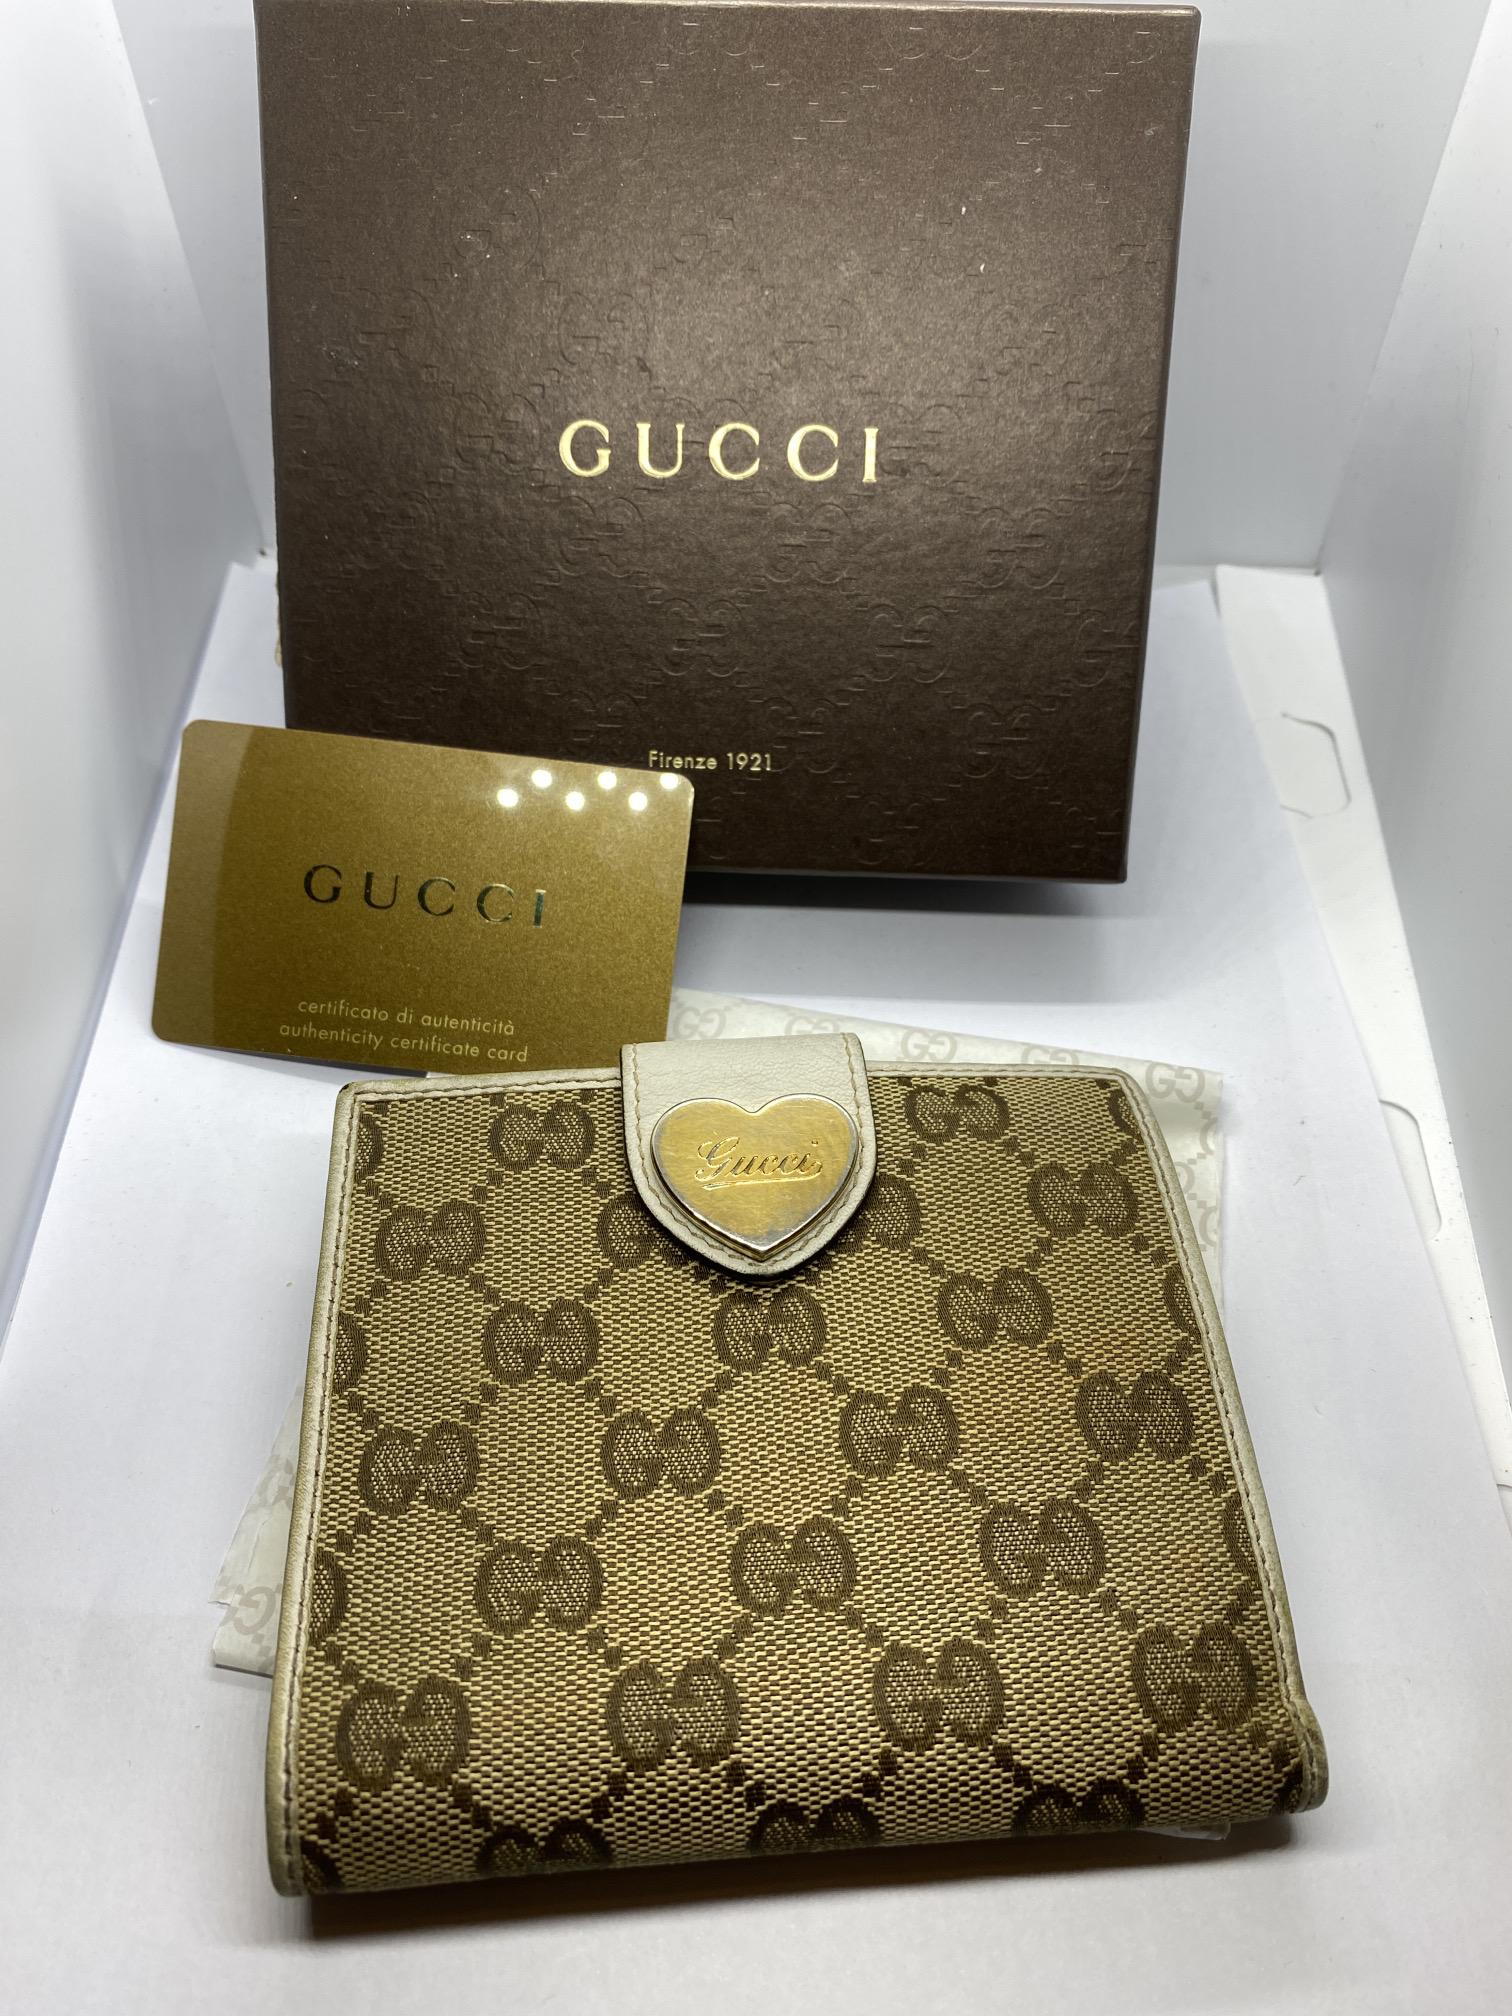 VINTAGE GUCCI GG LOGO HEART PURSE WITH BOX ETC